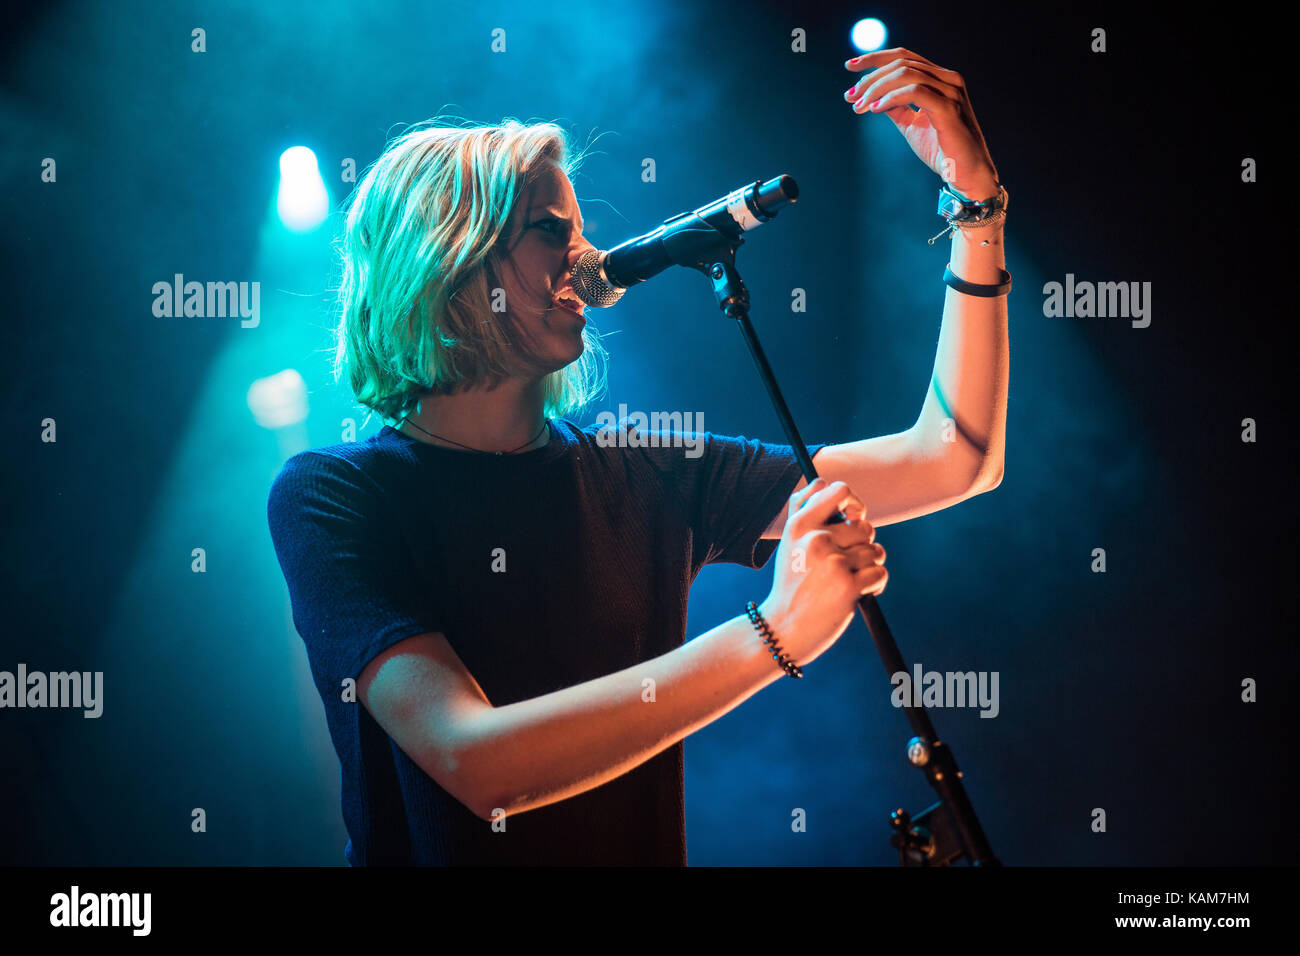 The Norwegian folk pop singer and musician Dagny performs a live concert at  the Norwegian music festival Trondheim Calling 2016. Norway, 05/02 2016  Stock Photo - Alamy